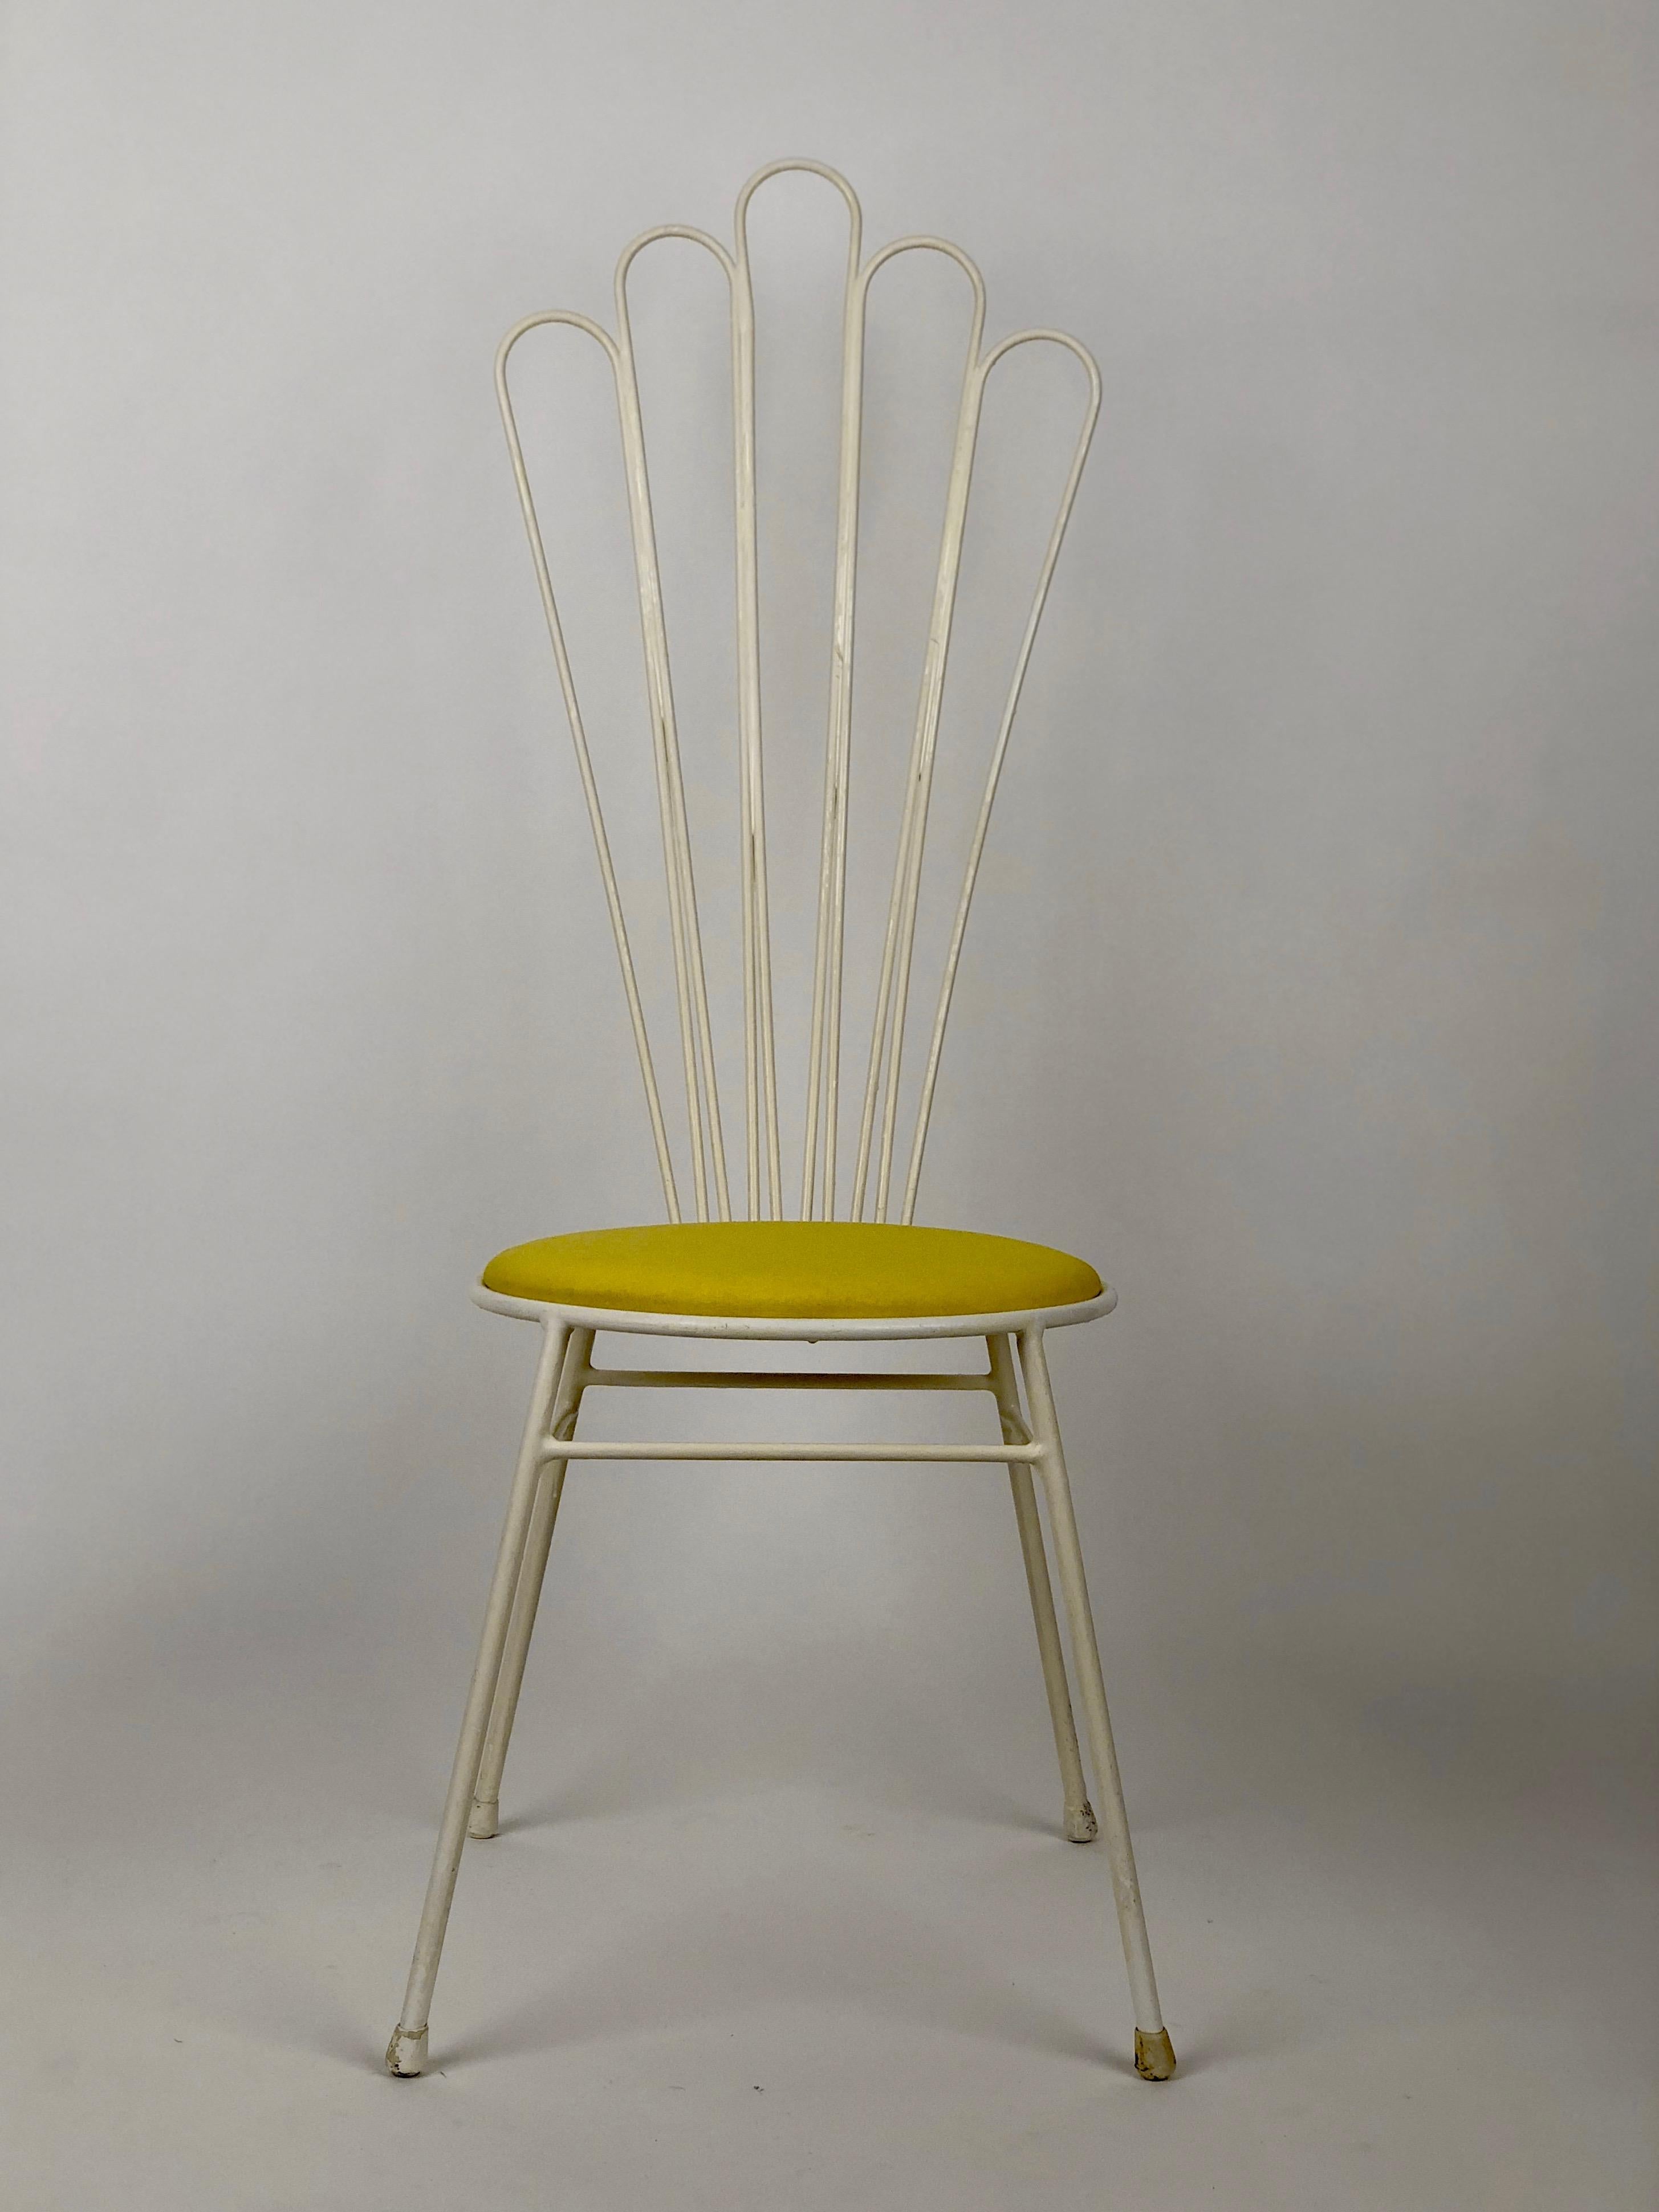 A lovely addition to your garden furniture, this chair comes from Austria. Welded steel rods have been bent to form a sea shell pattern. The seat has been refitted with new padding 
and recovered in a lemon yellow fabric.